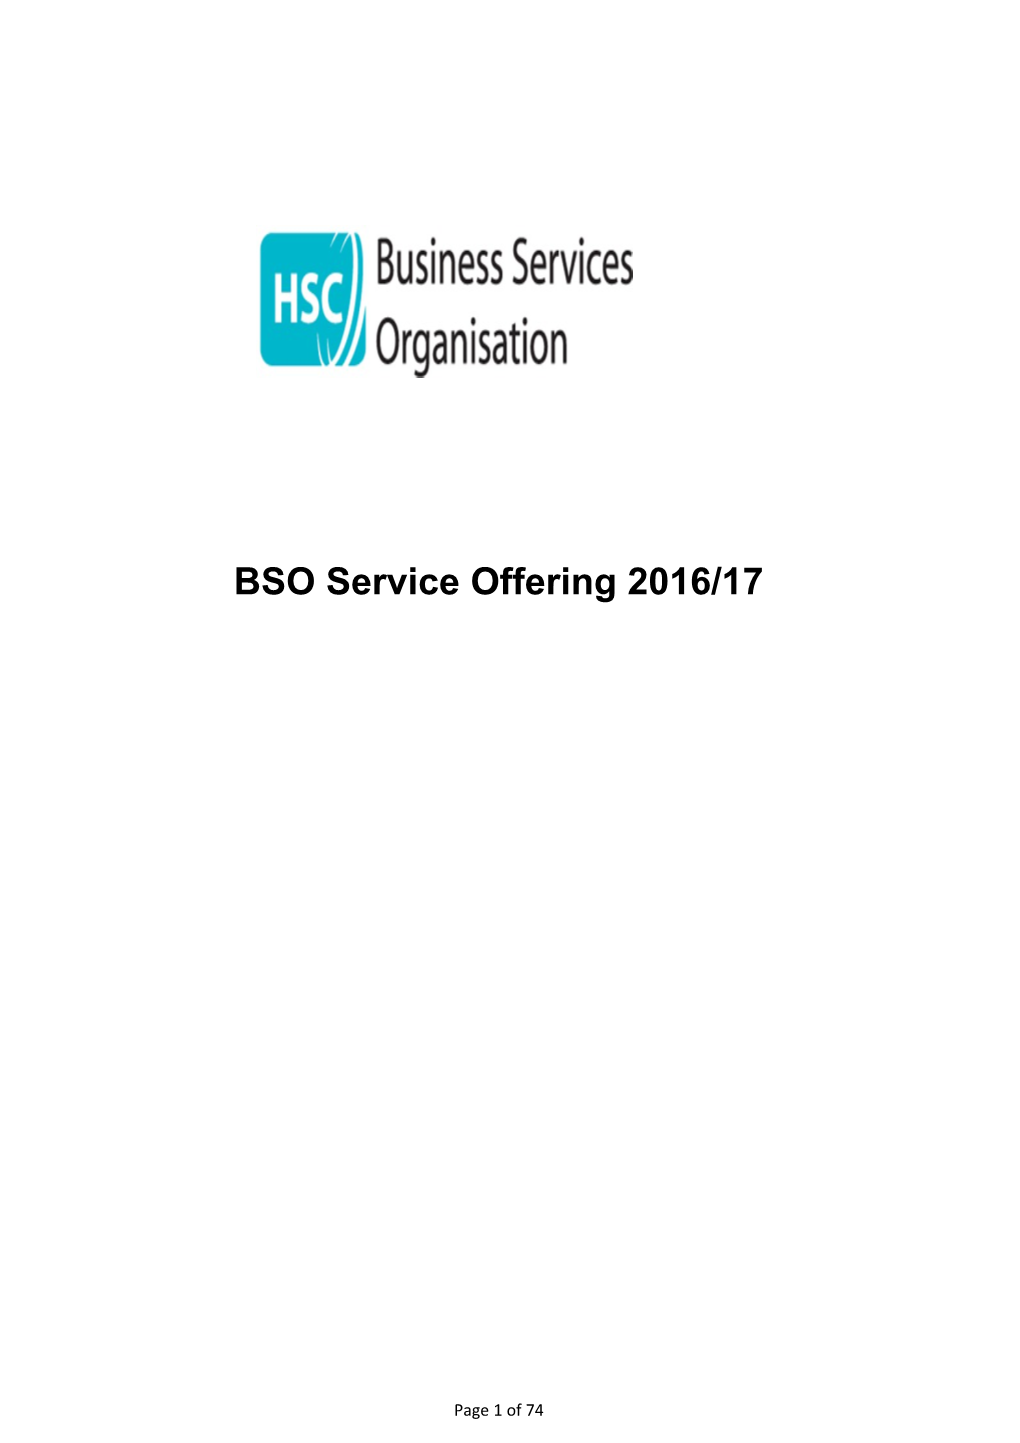 BSO Service Offering 2012/13